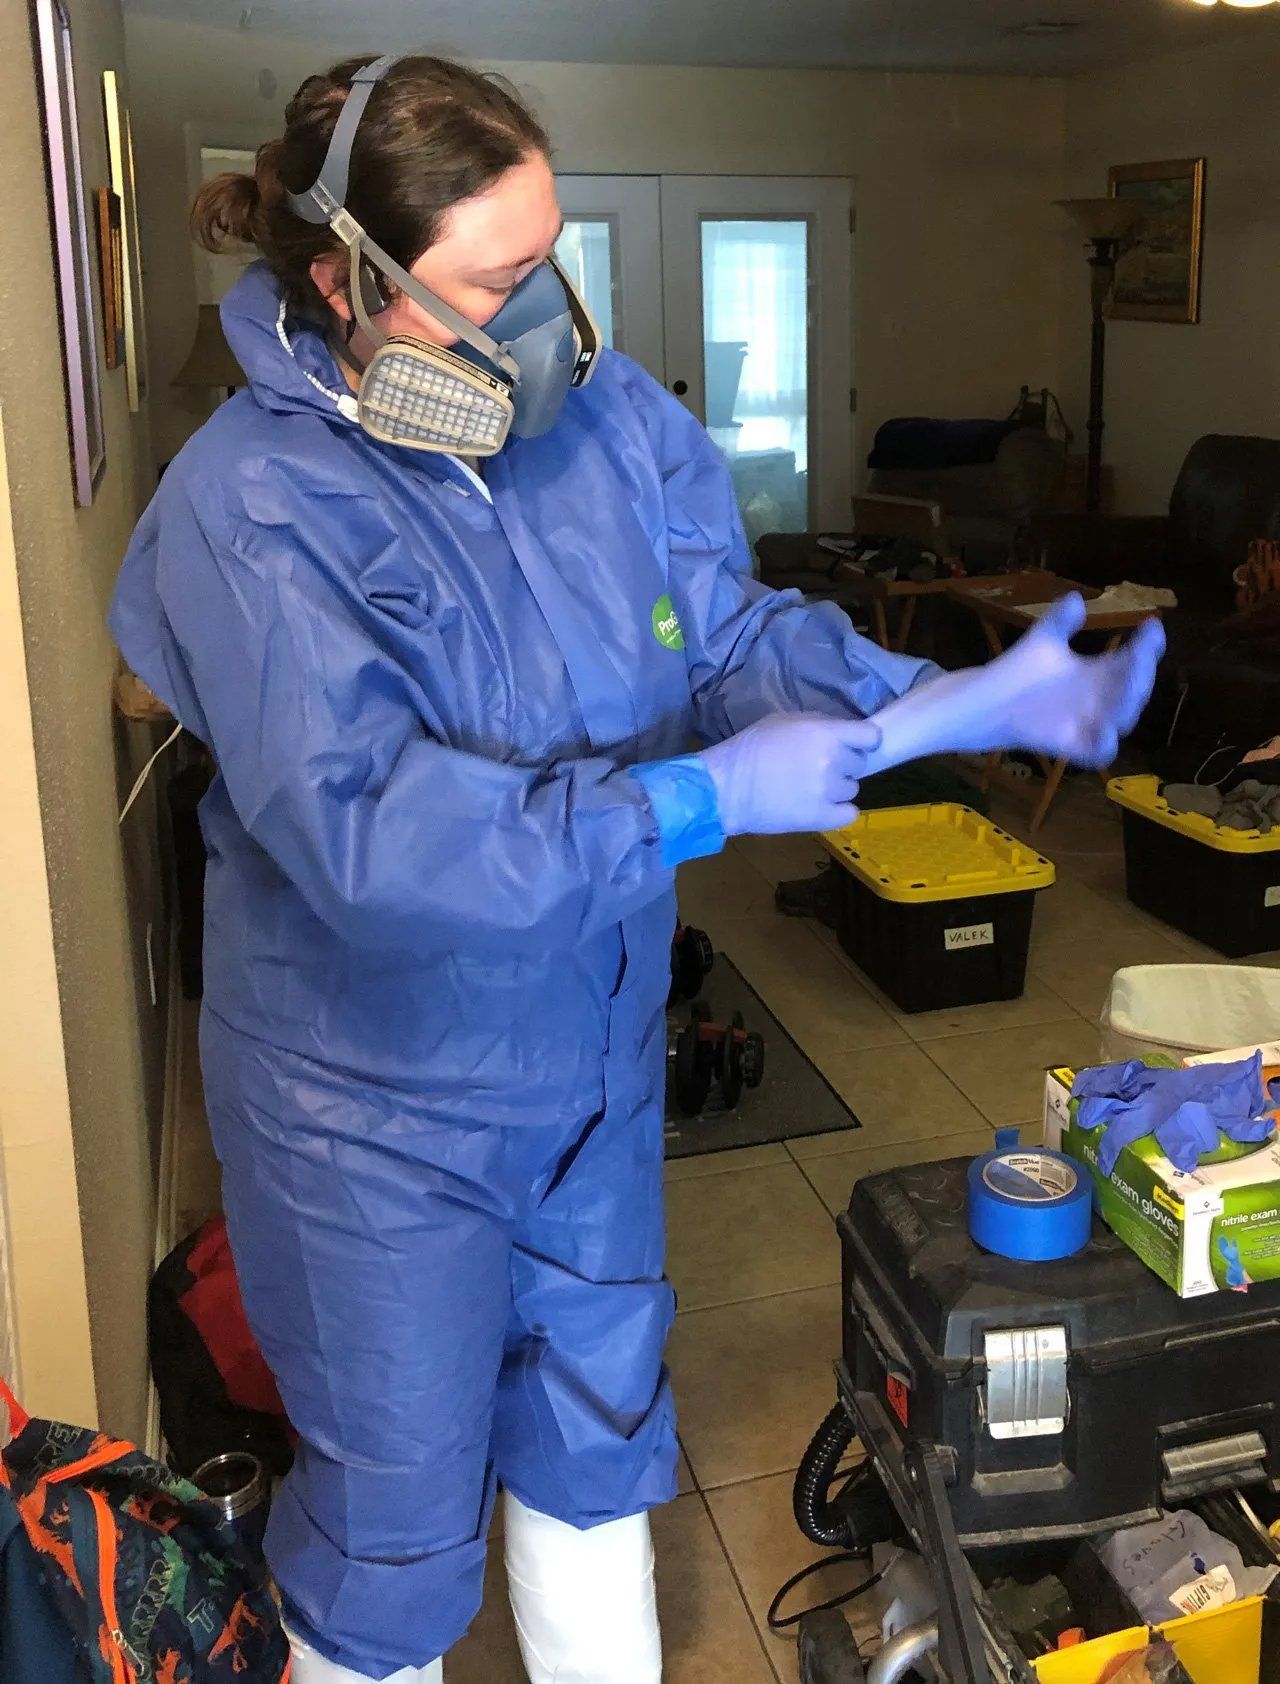 Professional Biohazard Worker Getting Ready for a Cleanup